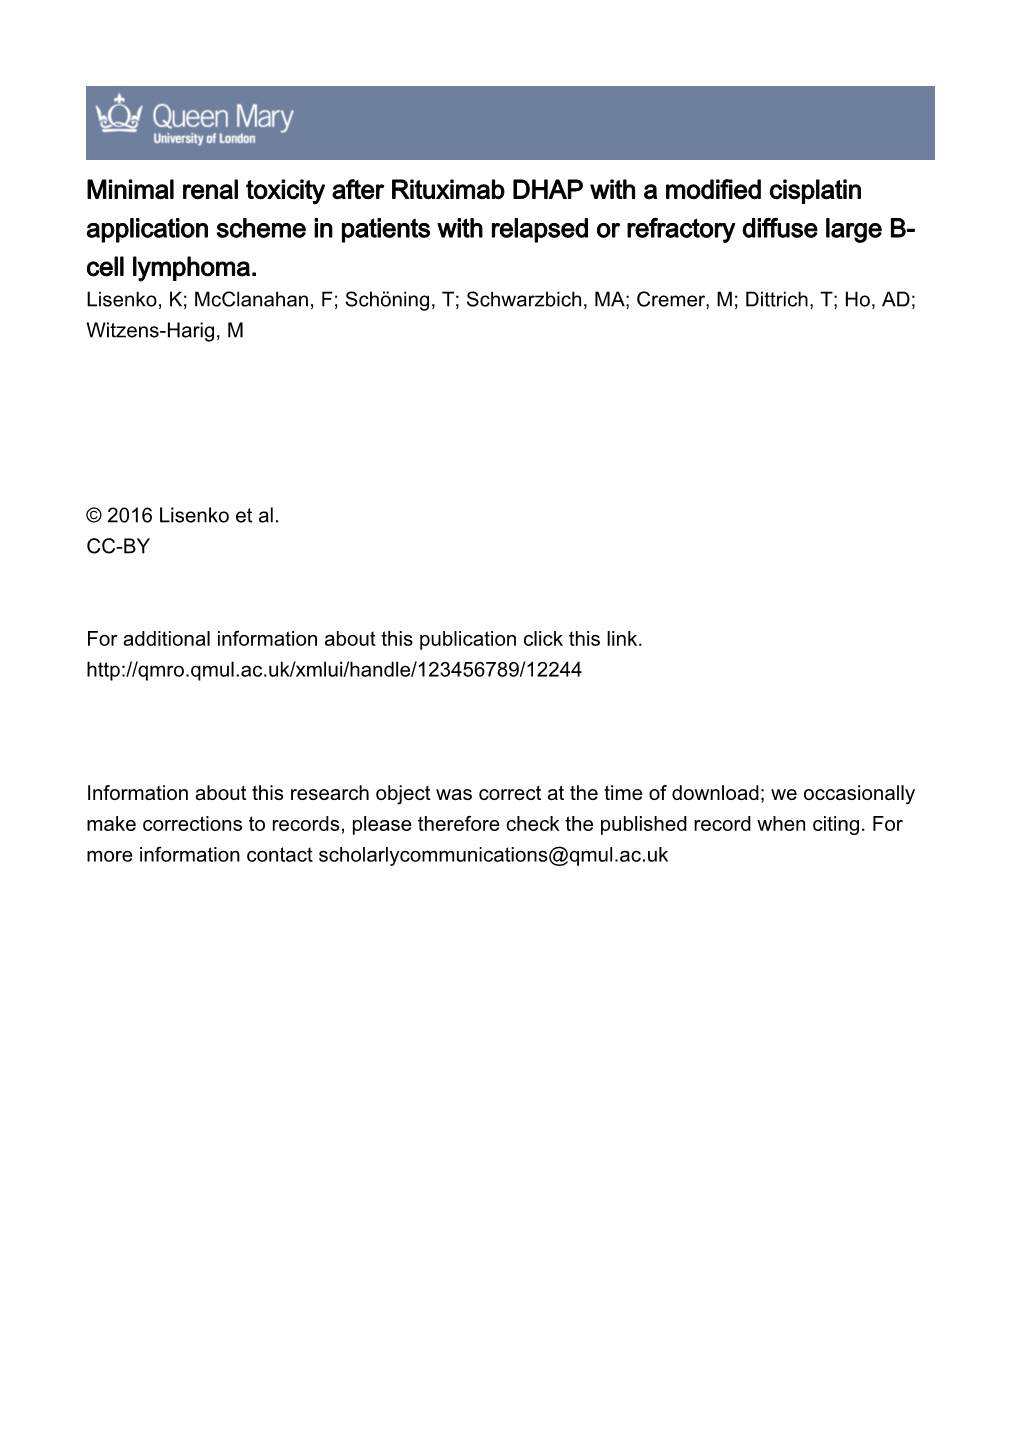 Minimal Renal Toxicity After Rituximab DHAP with a Modified Cisplatin Application Scheme in Patients with Relapsed Or Refractory Diffuse Large B- Cell Lymphoma